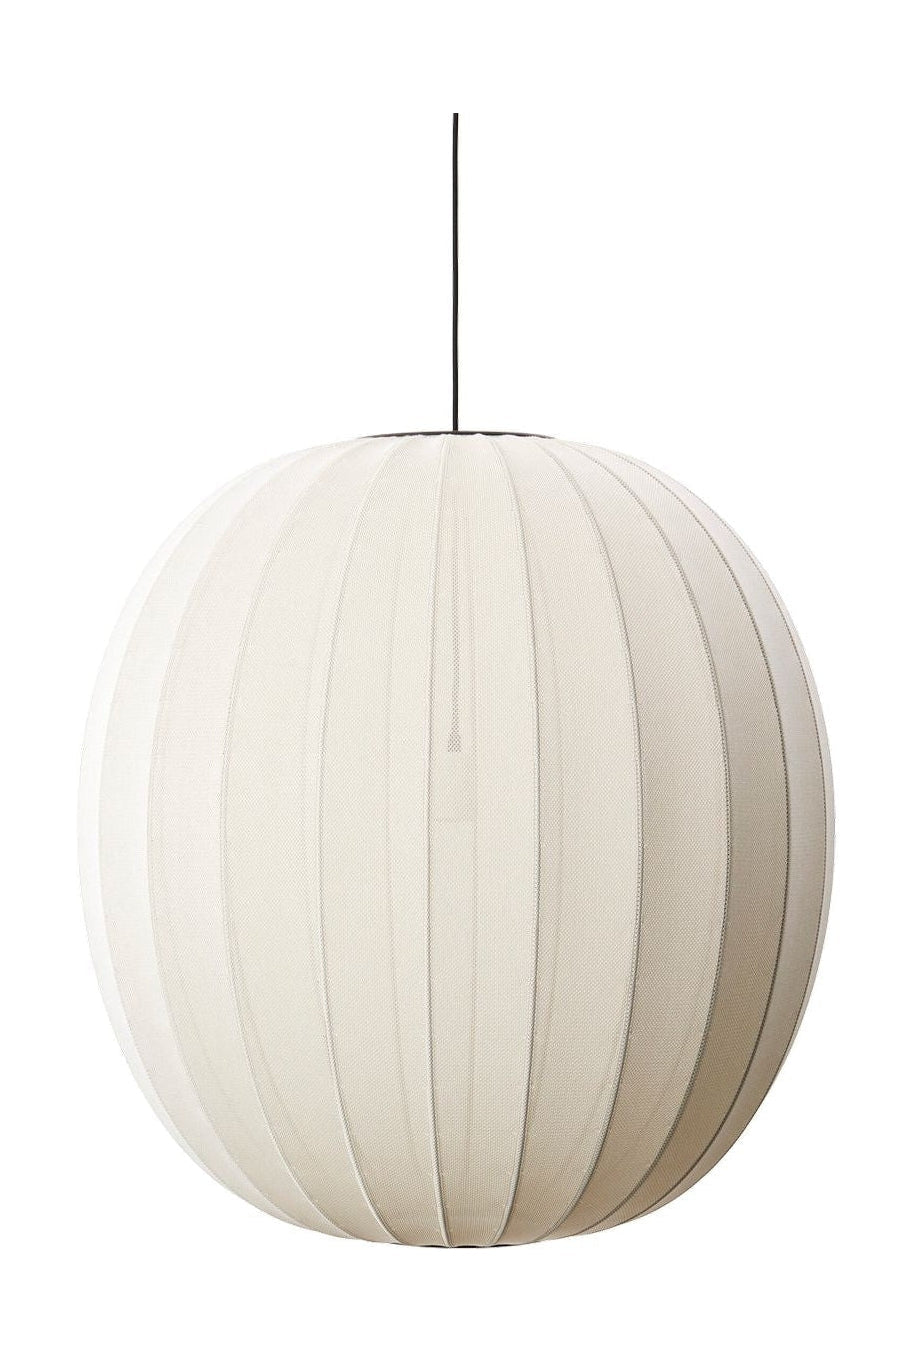 Made By Hand Knit Wit 75 Round Pendant Lamp, Pearl White